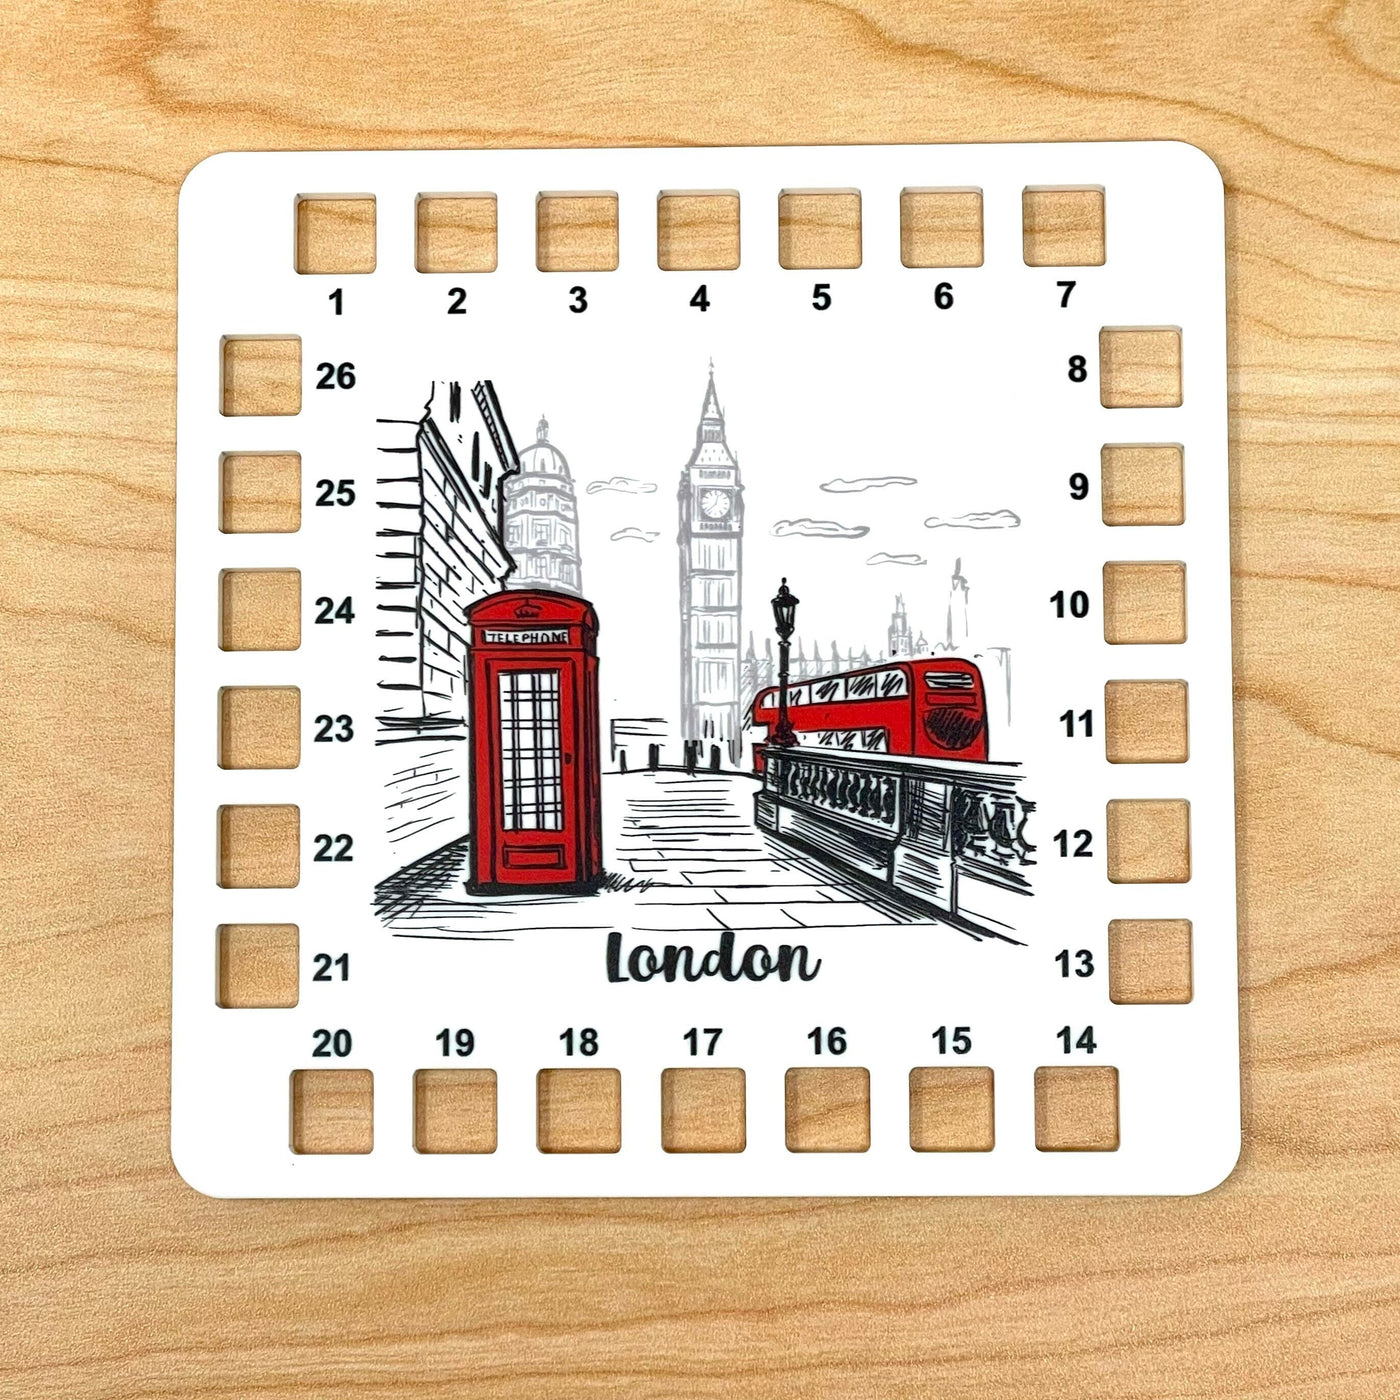 London acrylic thread holder (holds up to 26 colours) for cross stitch and emb